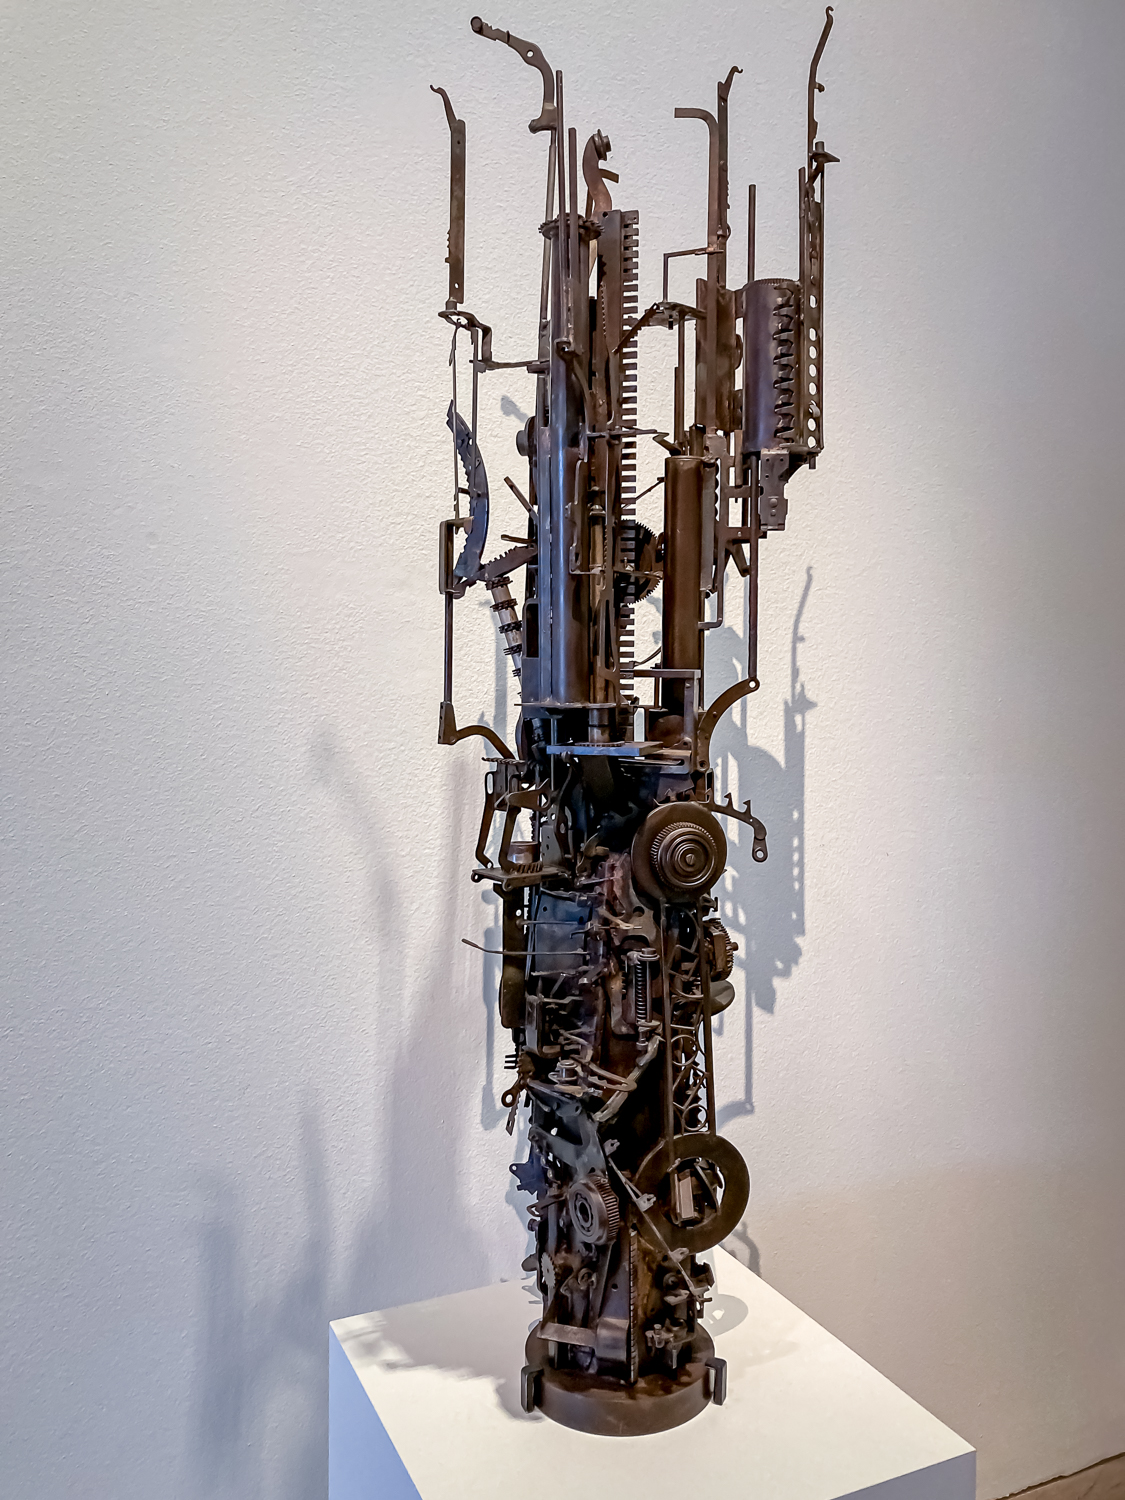 A sculpture constructed from industrial iron fragments